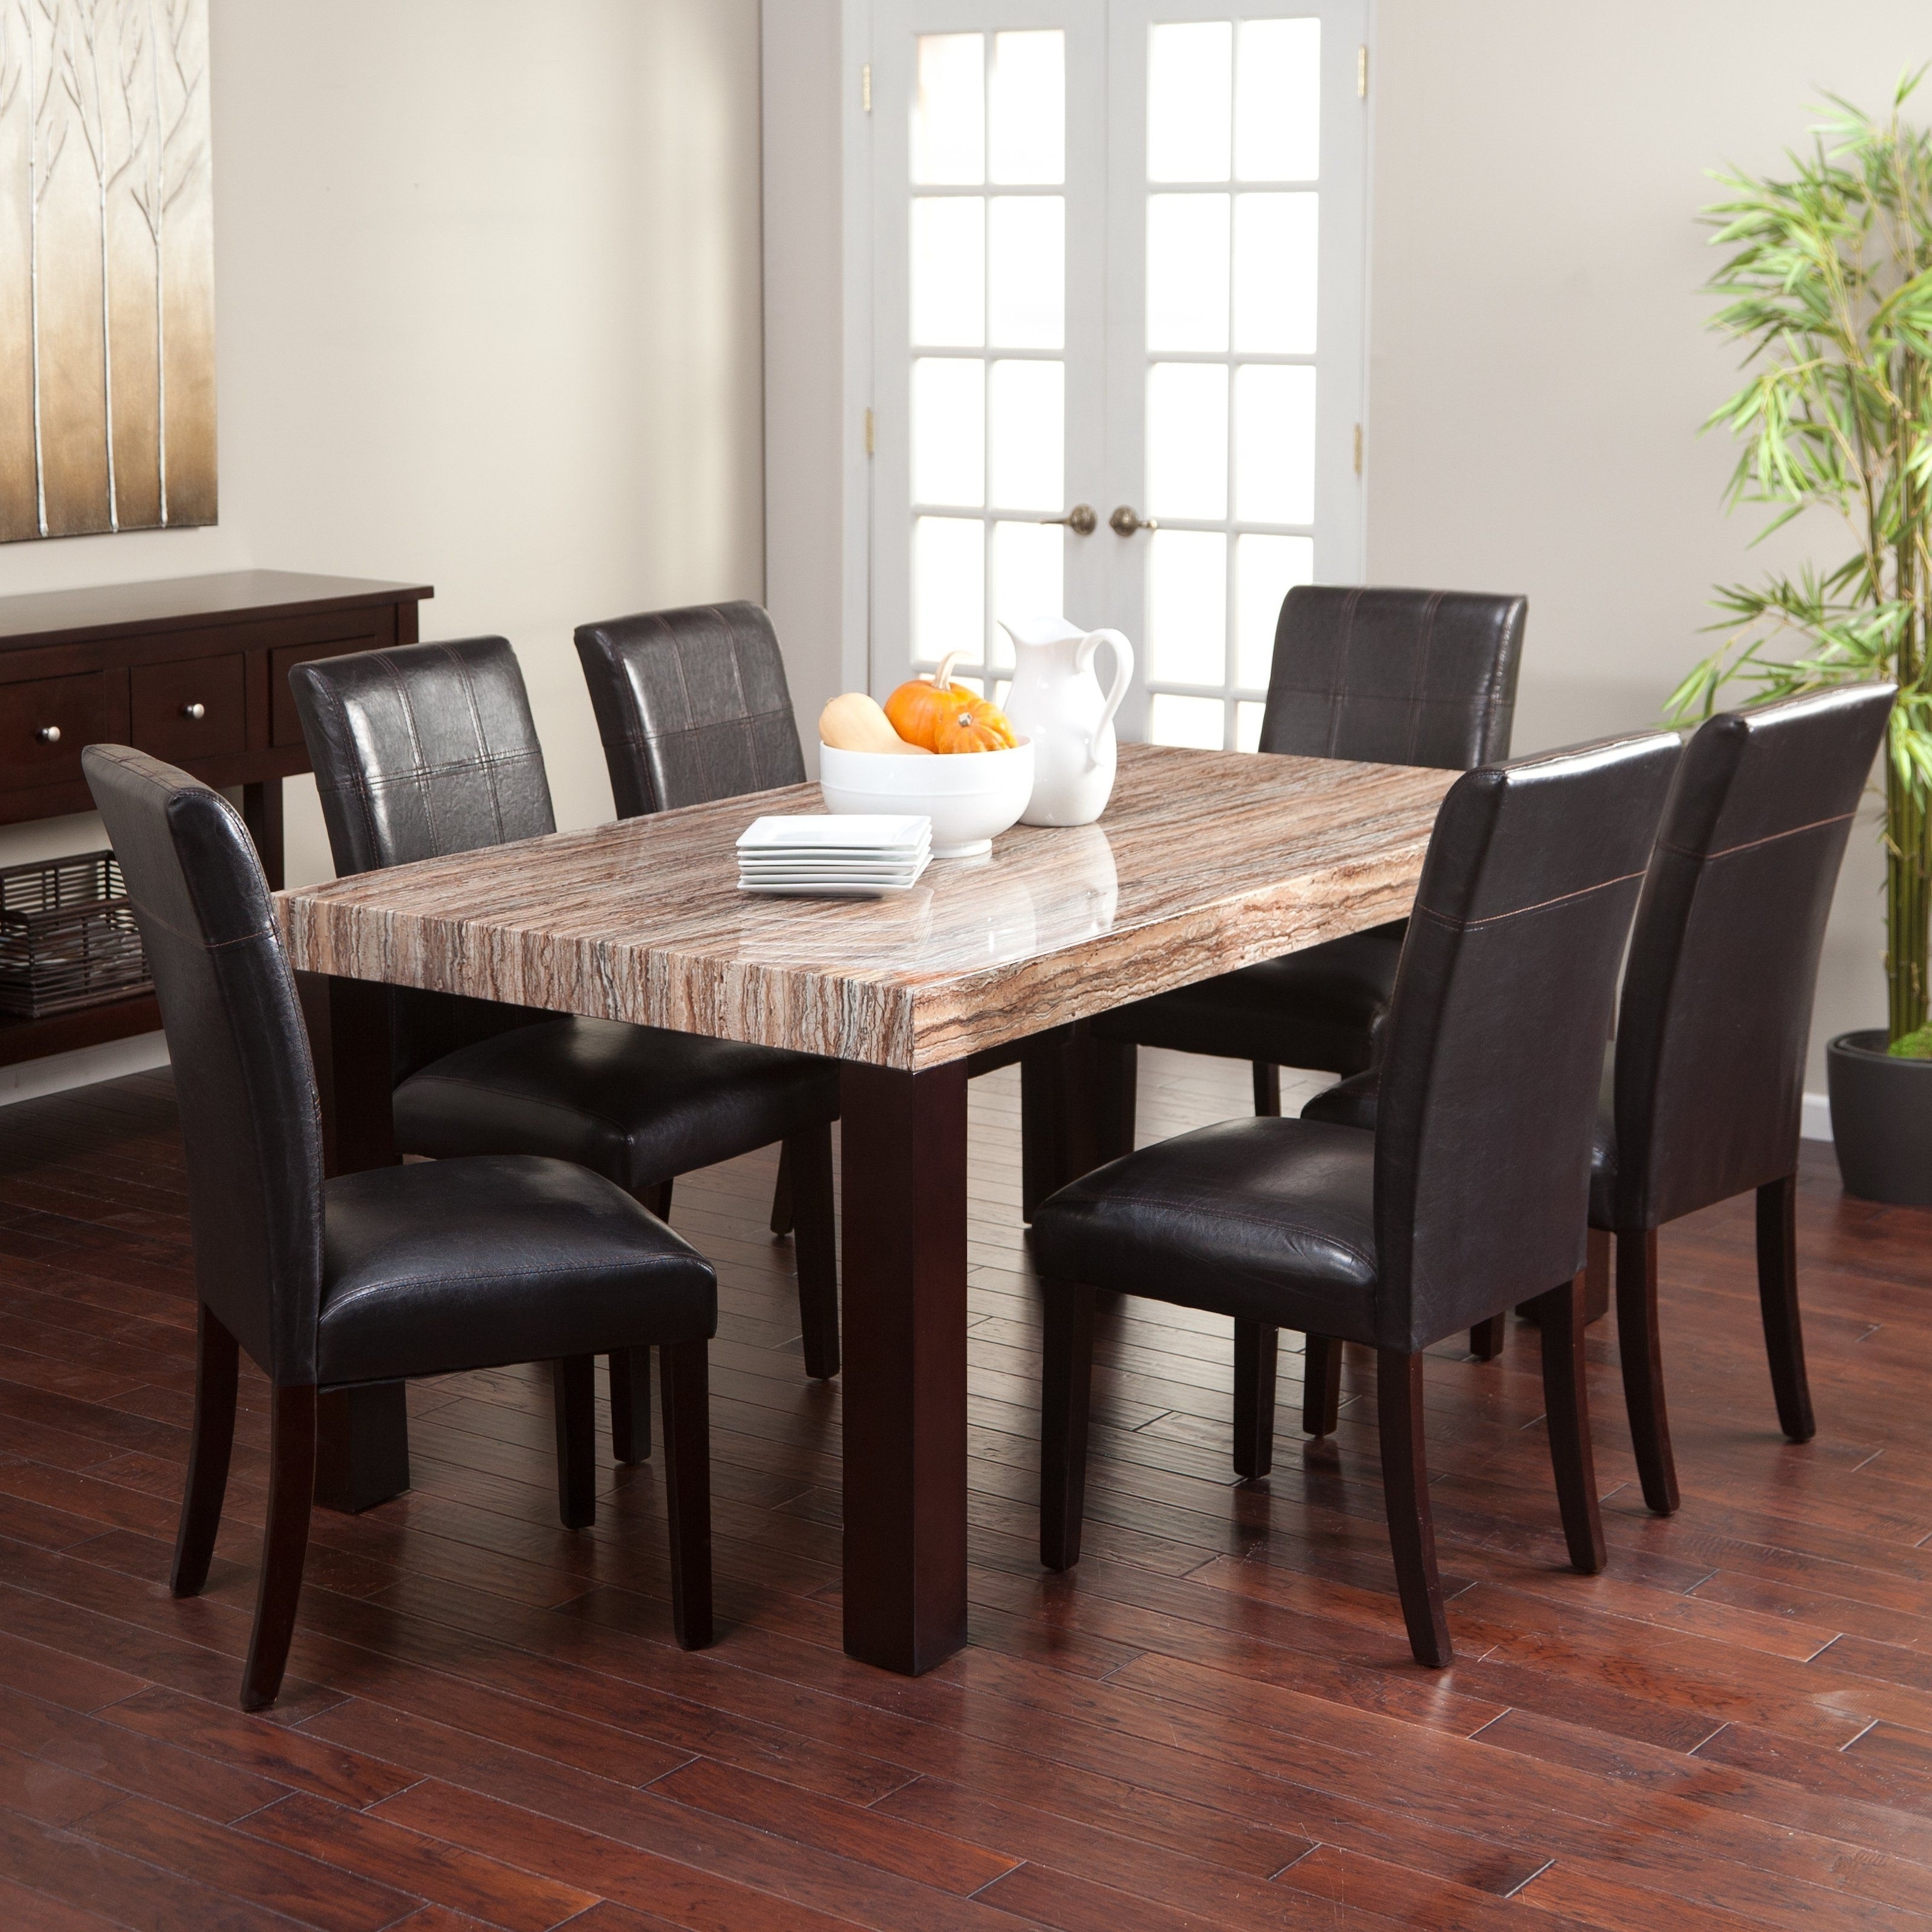 Beautiful 7 Piece Dining Room Table Set with Black Leather Chairs and Faux Marble Top Dinner Set Furniture